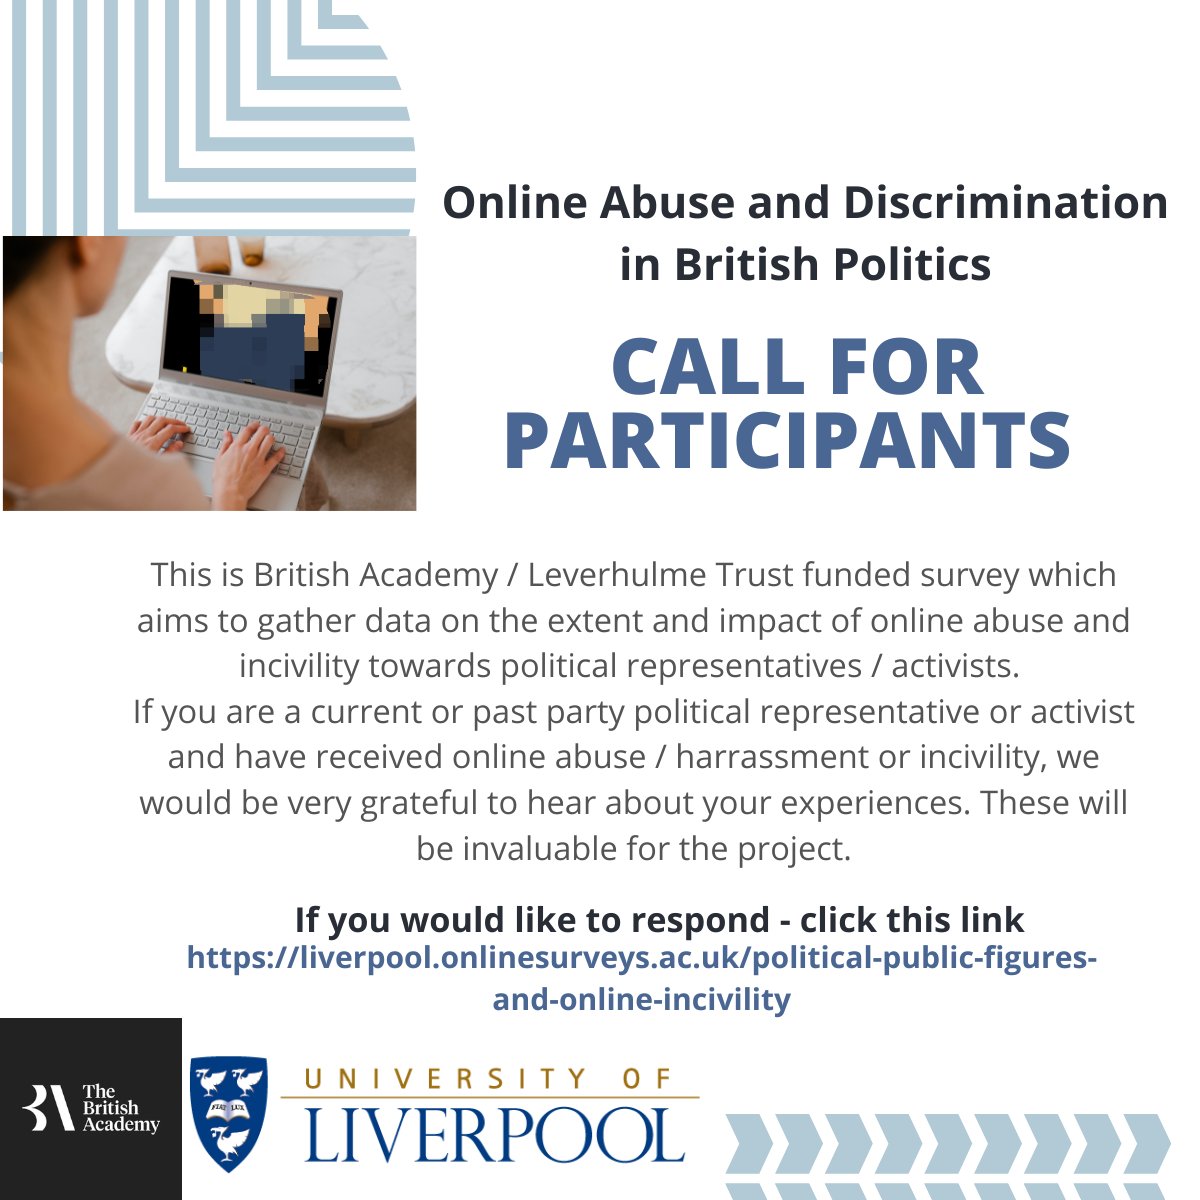 🚨 Please RT! Today @Harm365 & I launch our survey into online abuse in UK Politics. If you're a current/former political representative or activist we want to hear from you. The survey should take 15 minutes and your insights will be invaluable. Link here liverpool.onlinesurveys.ac.uk/political-publ…